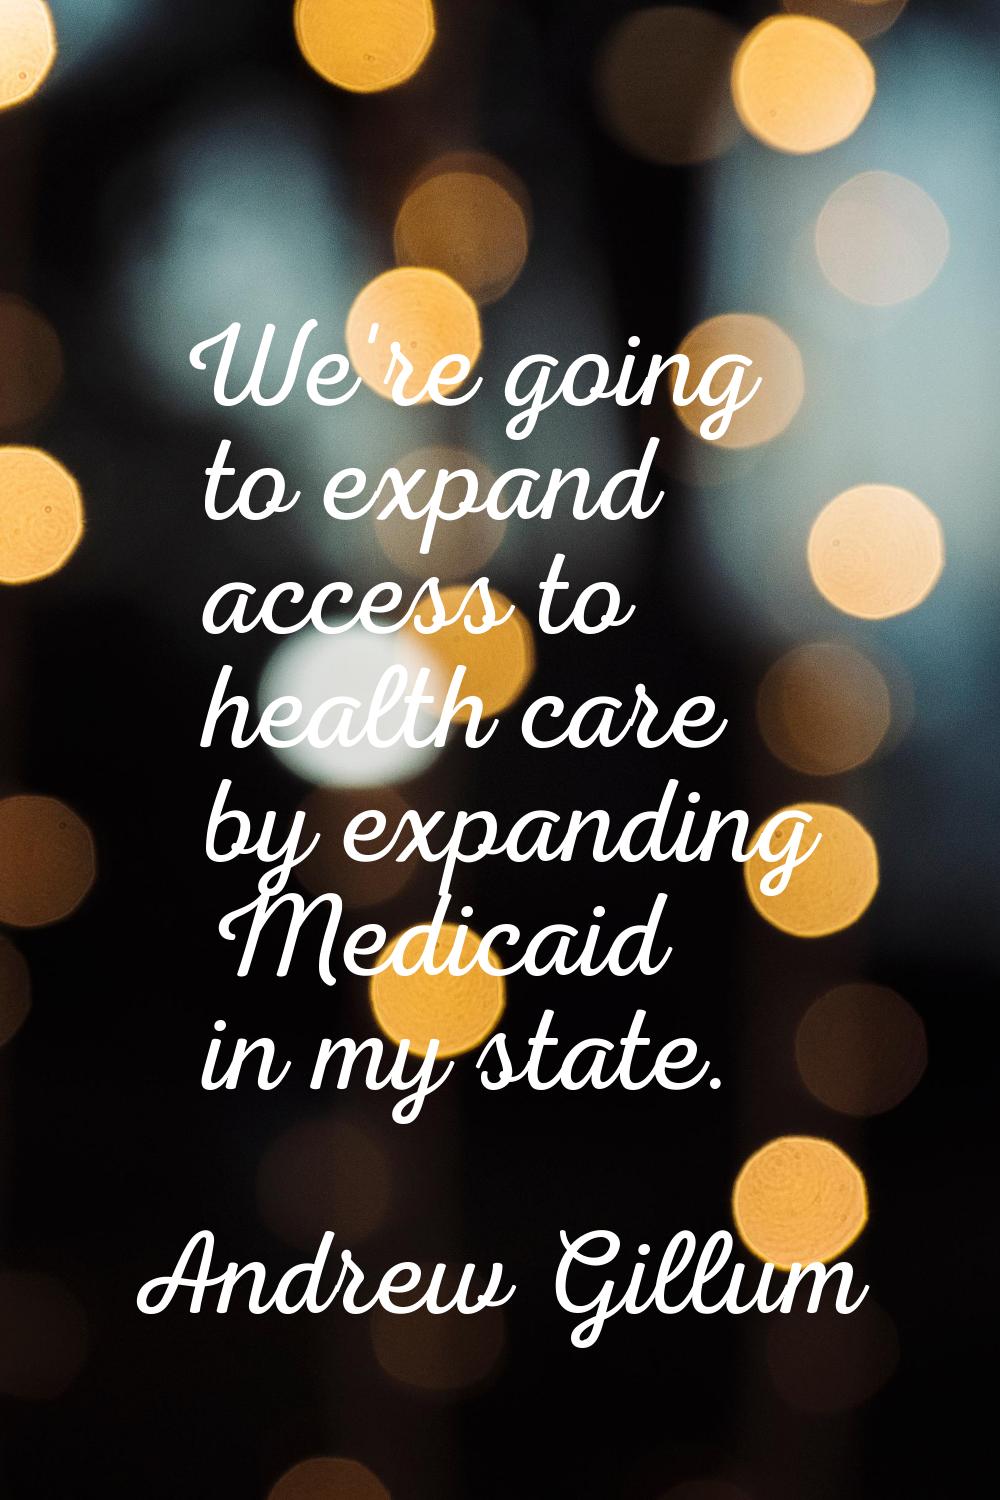 We're going to expand access to health care by expanding Medicaid in my state.